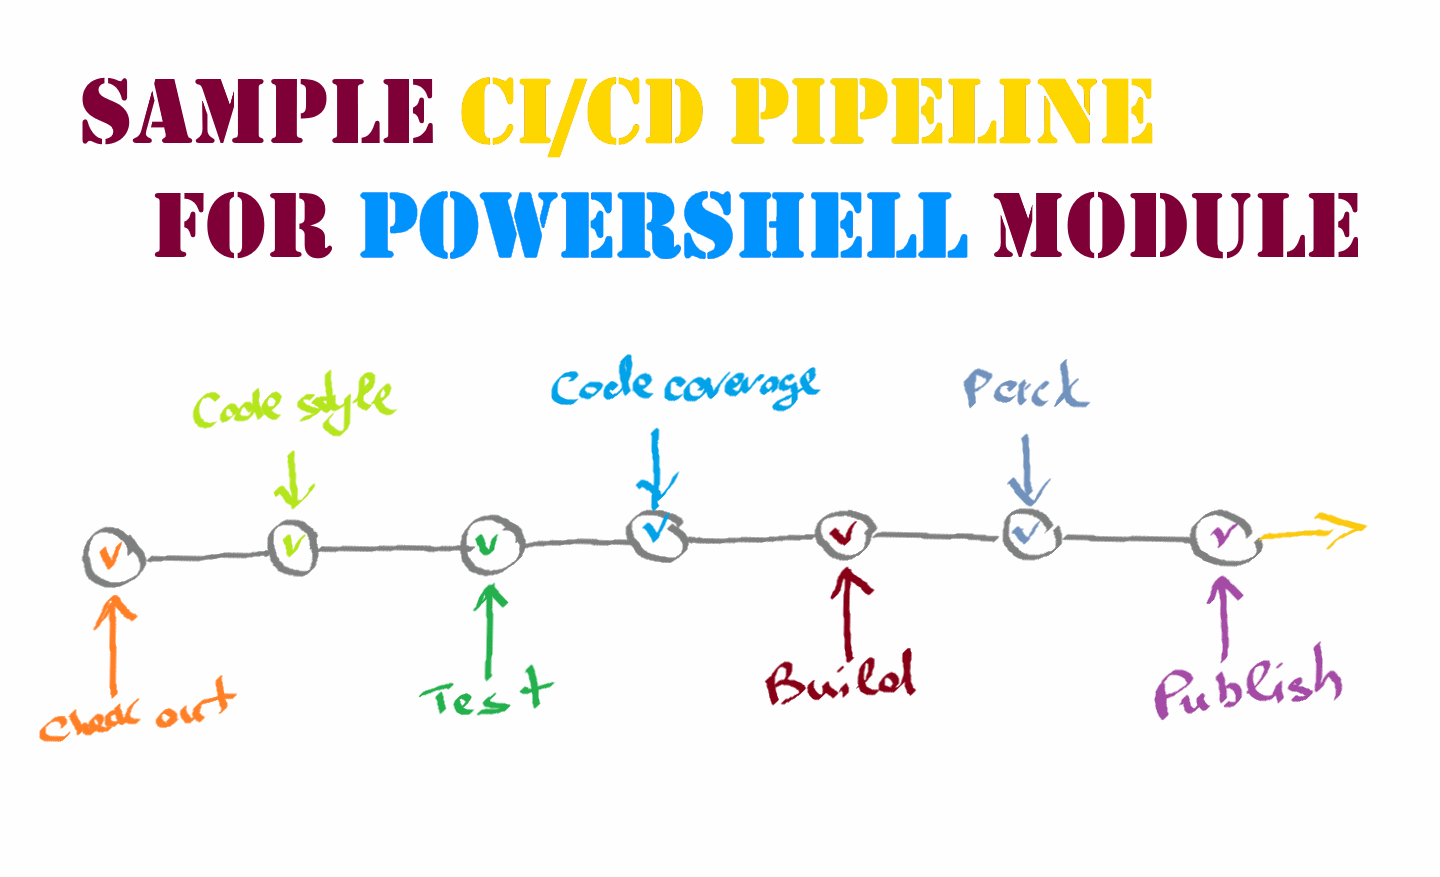 A sample CI/CD pipeline for PowerShell module